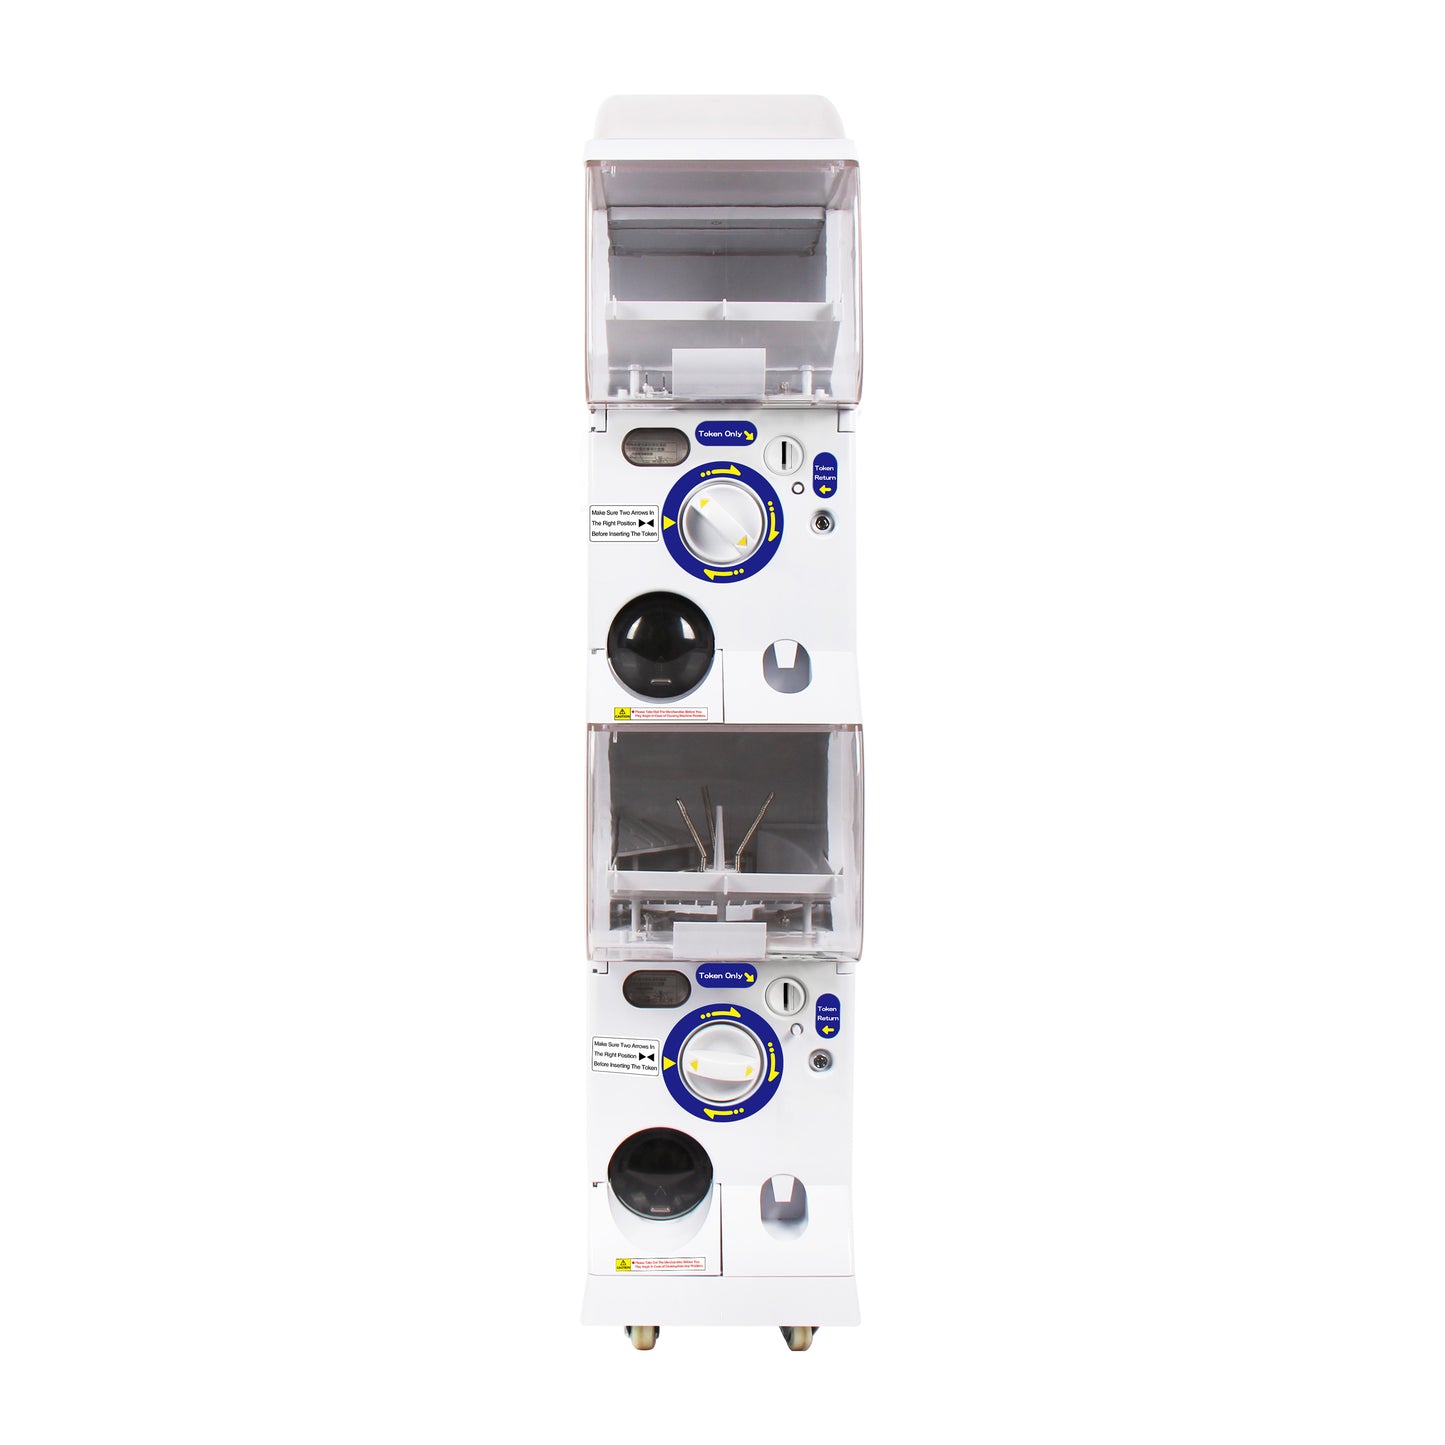 99911 CAPSULE GASHAPON VENDING MACHINE-1 - AVAILABLE - CONTACT BC@BCMINI.COM TO ORDER